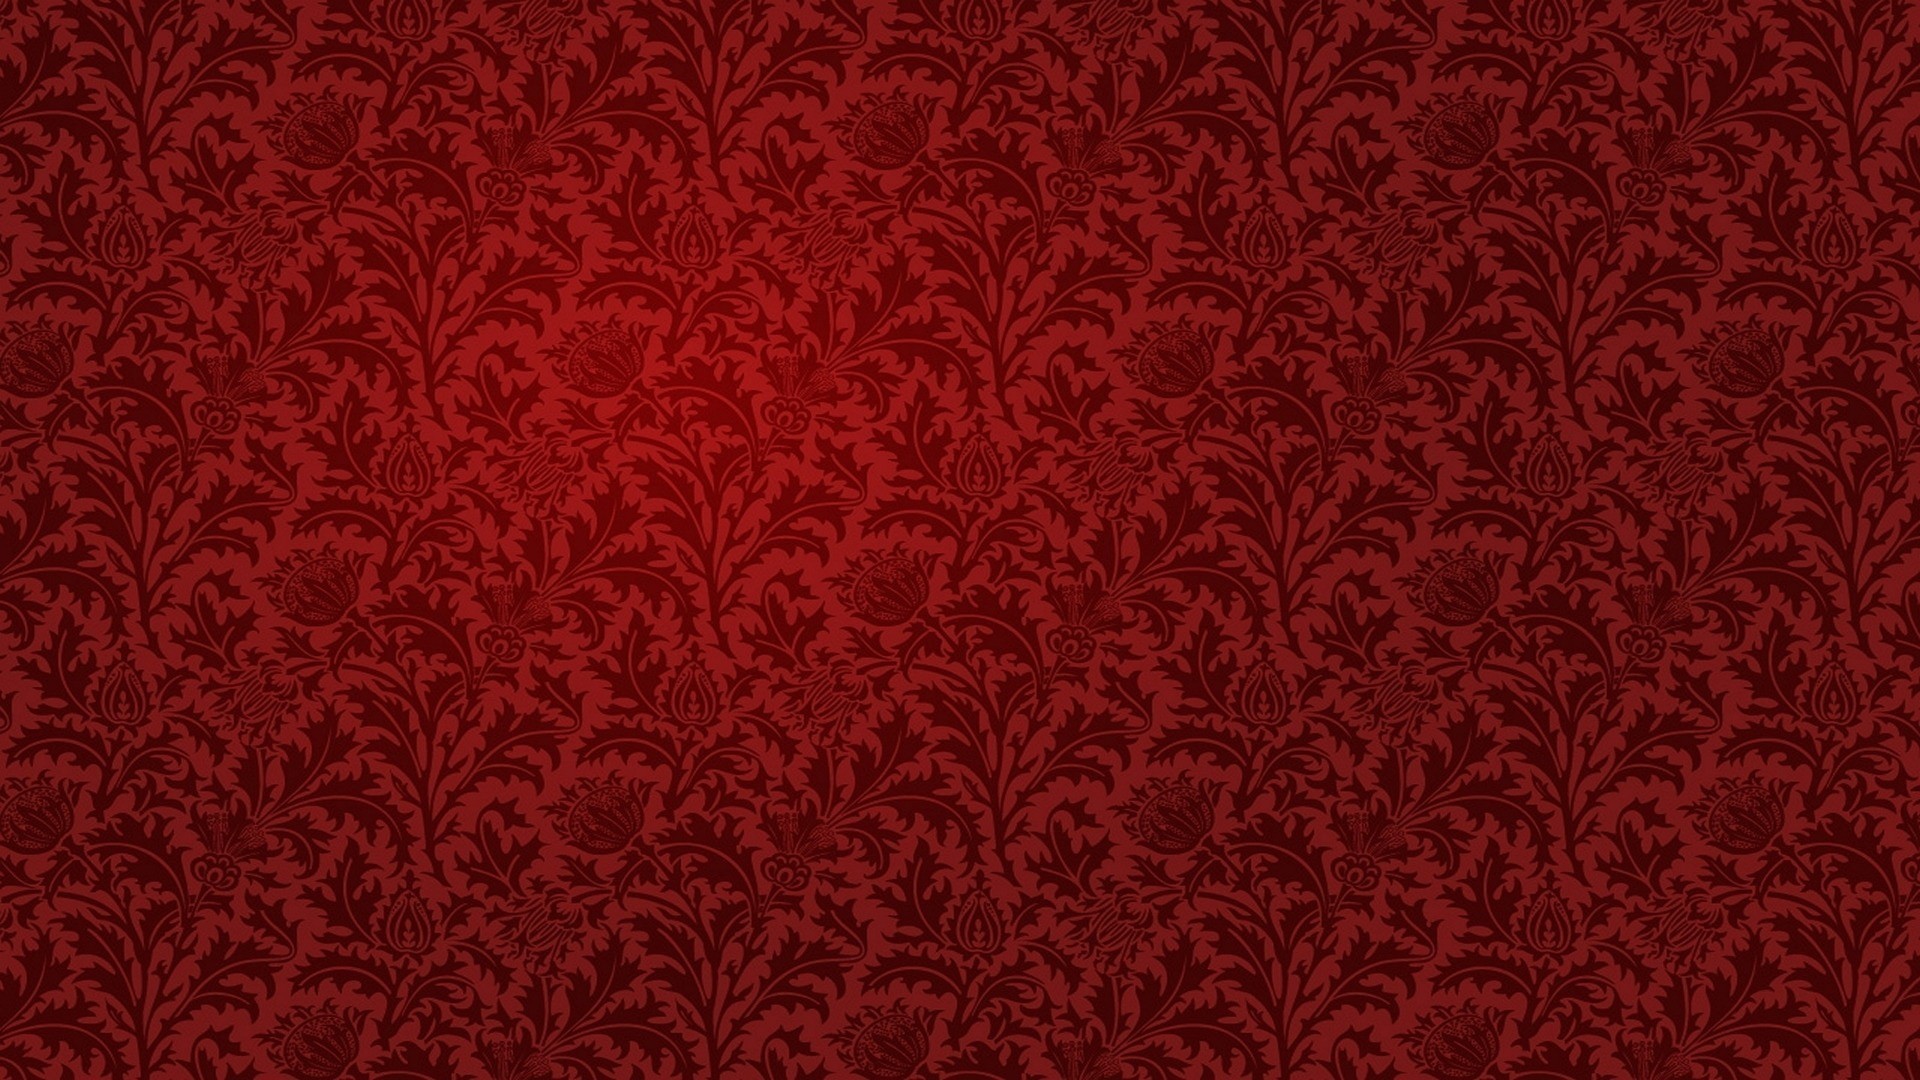 1920x1080 Related Wallpapers from Grunge Background. Vintage Wallpaper